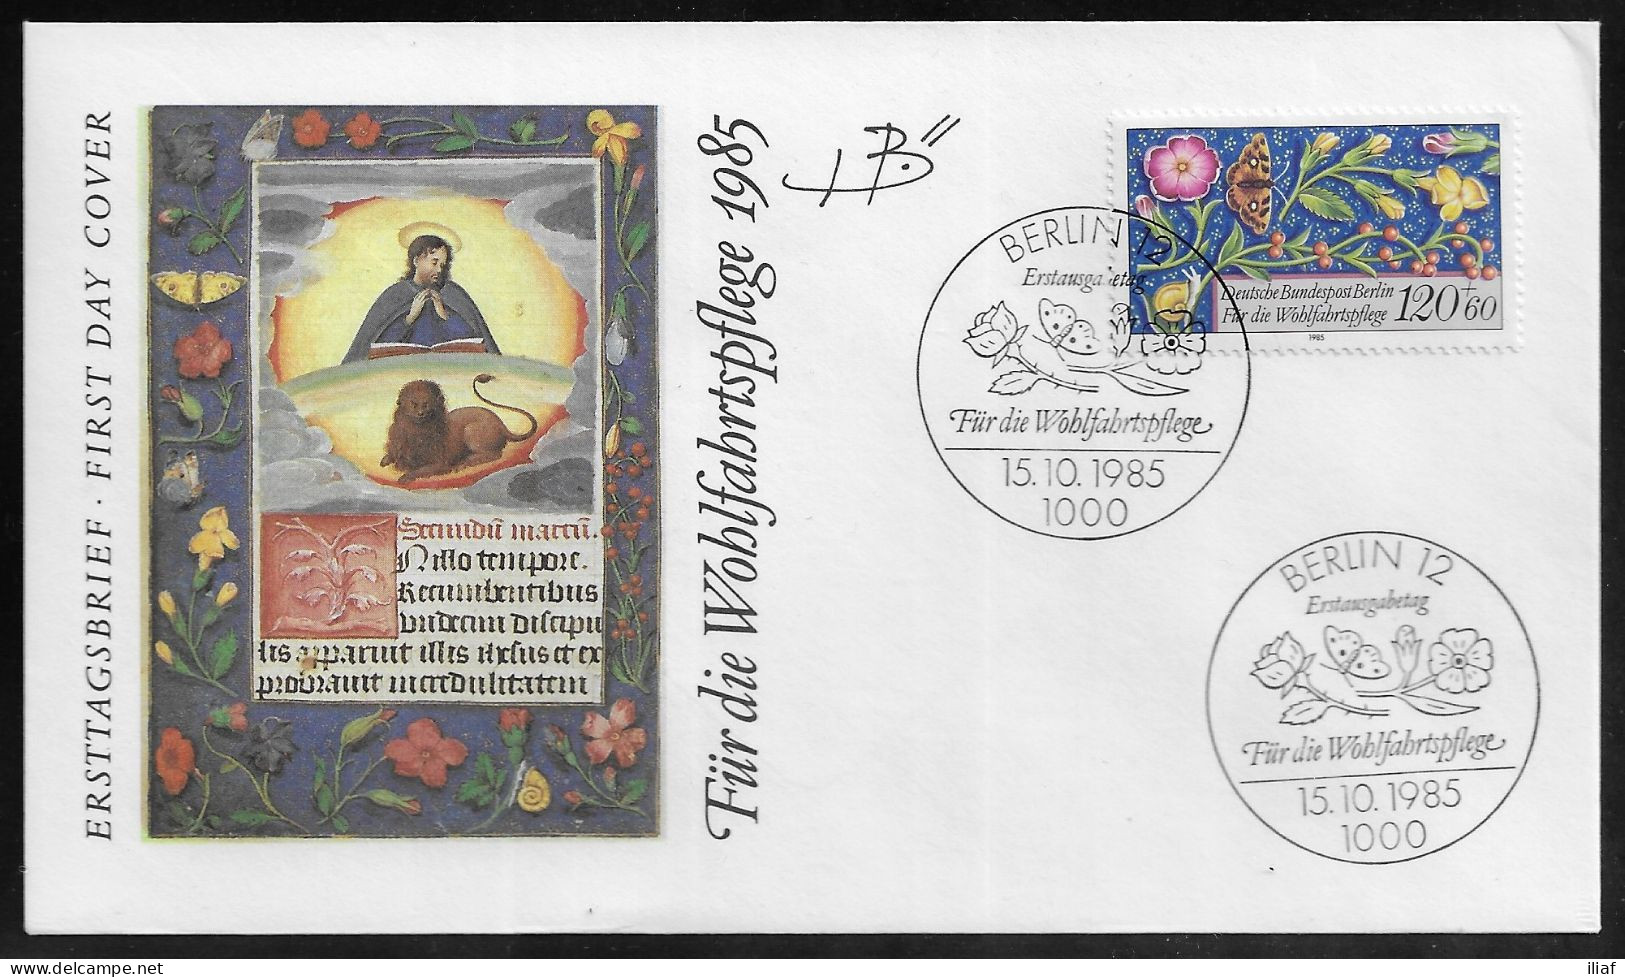 Germany Berlin. FDC Mi. 744-747. 4 Envelopes.  Welfare: Miniatures.  FDC Cancellation On FDC Envelopes - 1981-1990